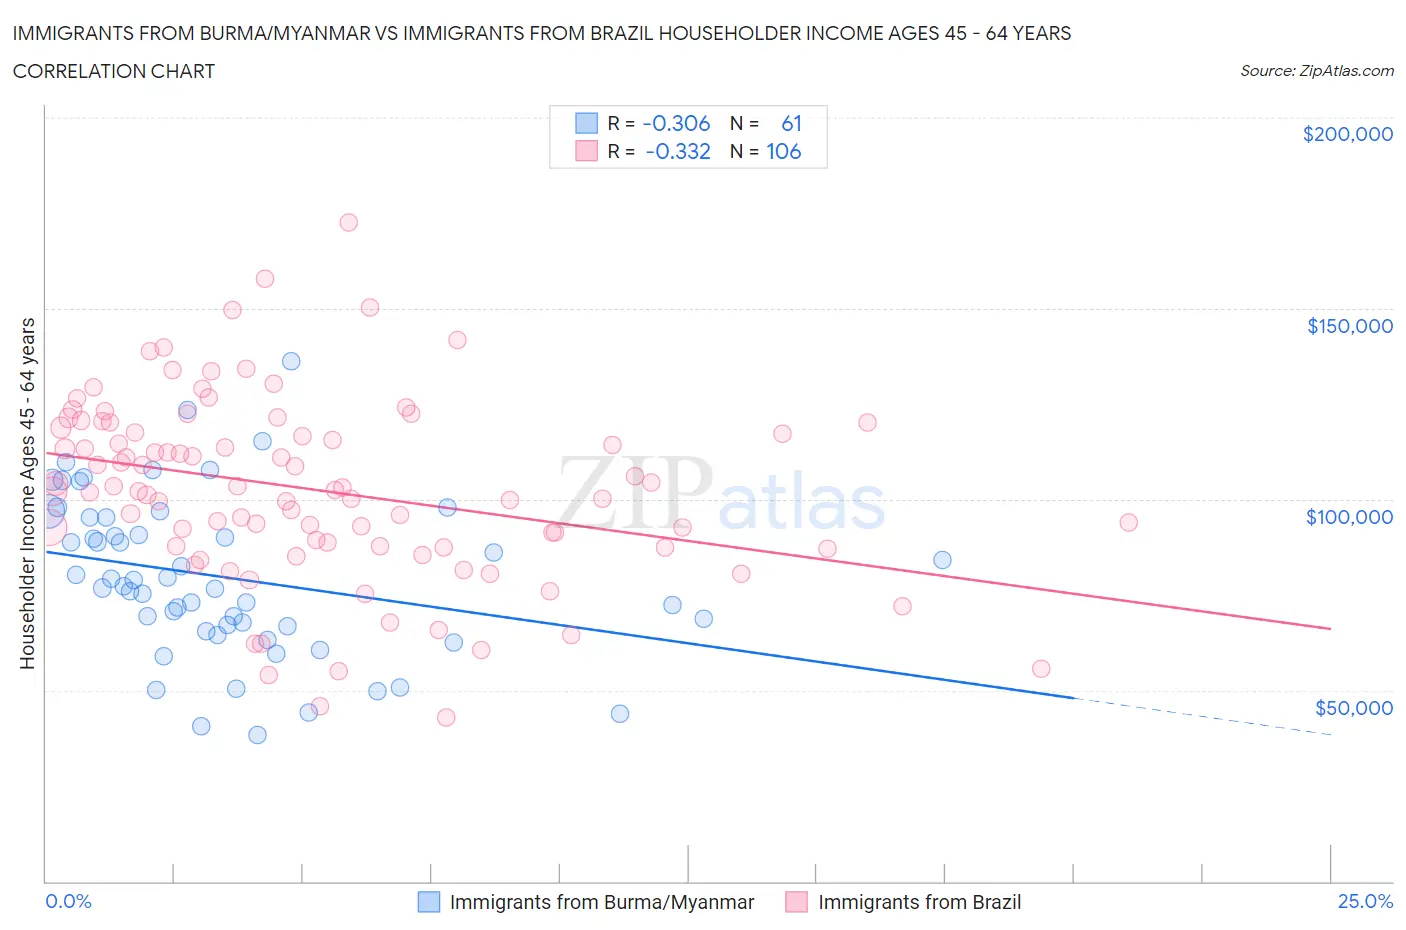 Immigrants from Burma/Myanmar vs Immigrants from Brazil Householder Income Ages 45 - 64 years